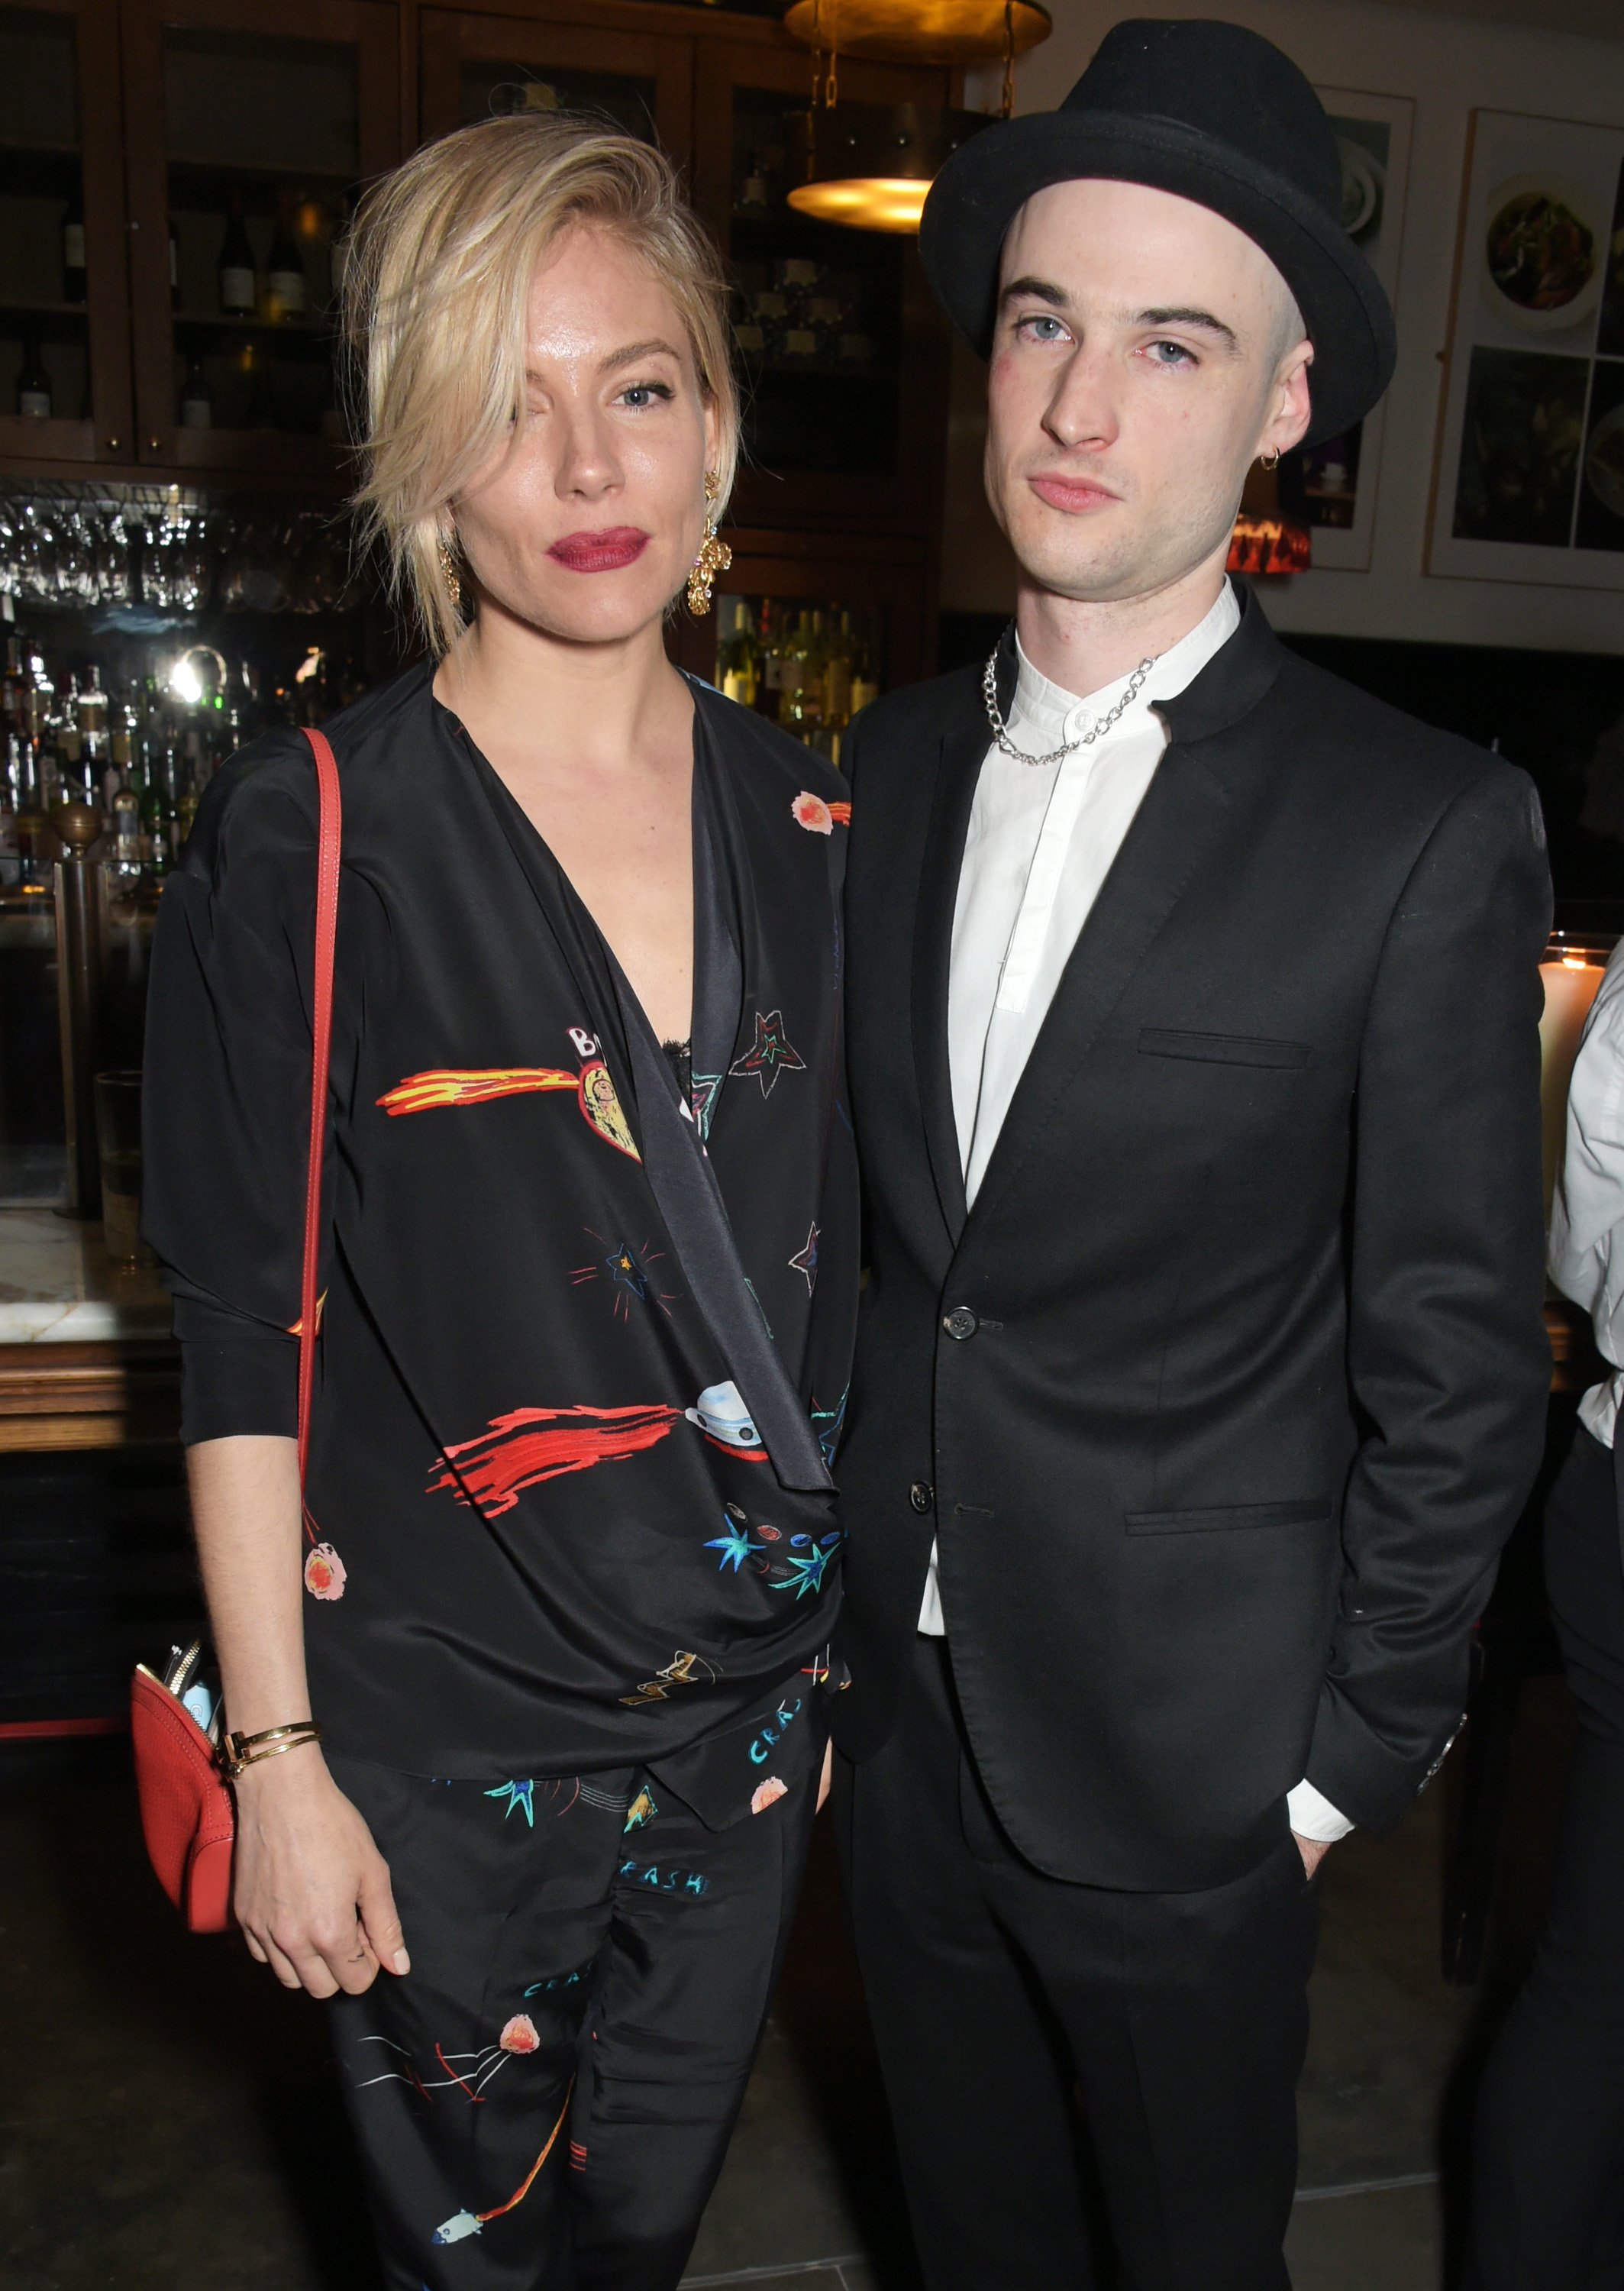 Sienna Miller and Tom Sturridge attend an after-party at The National Café on April 27, 2015, in London, England. | Source: Getty Images